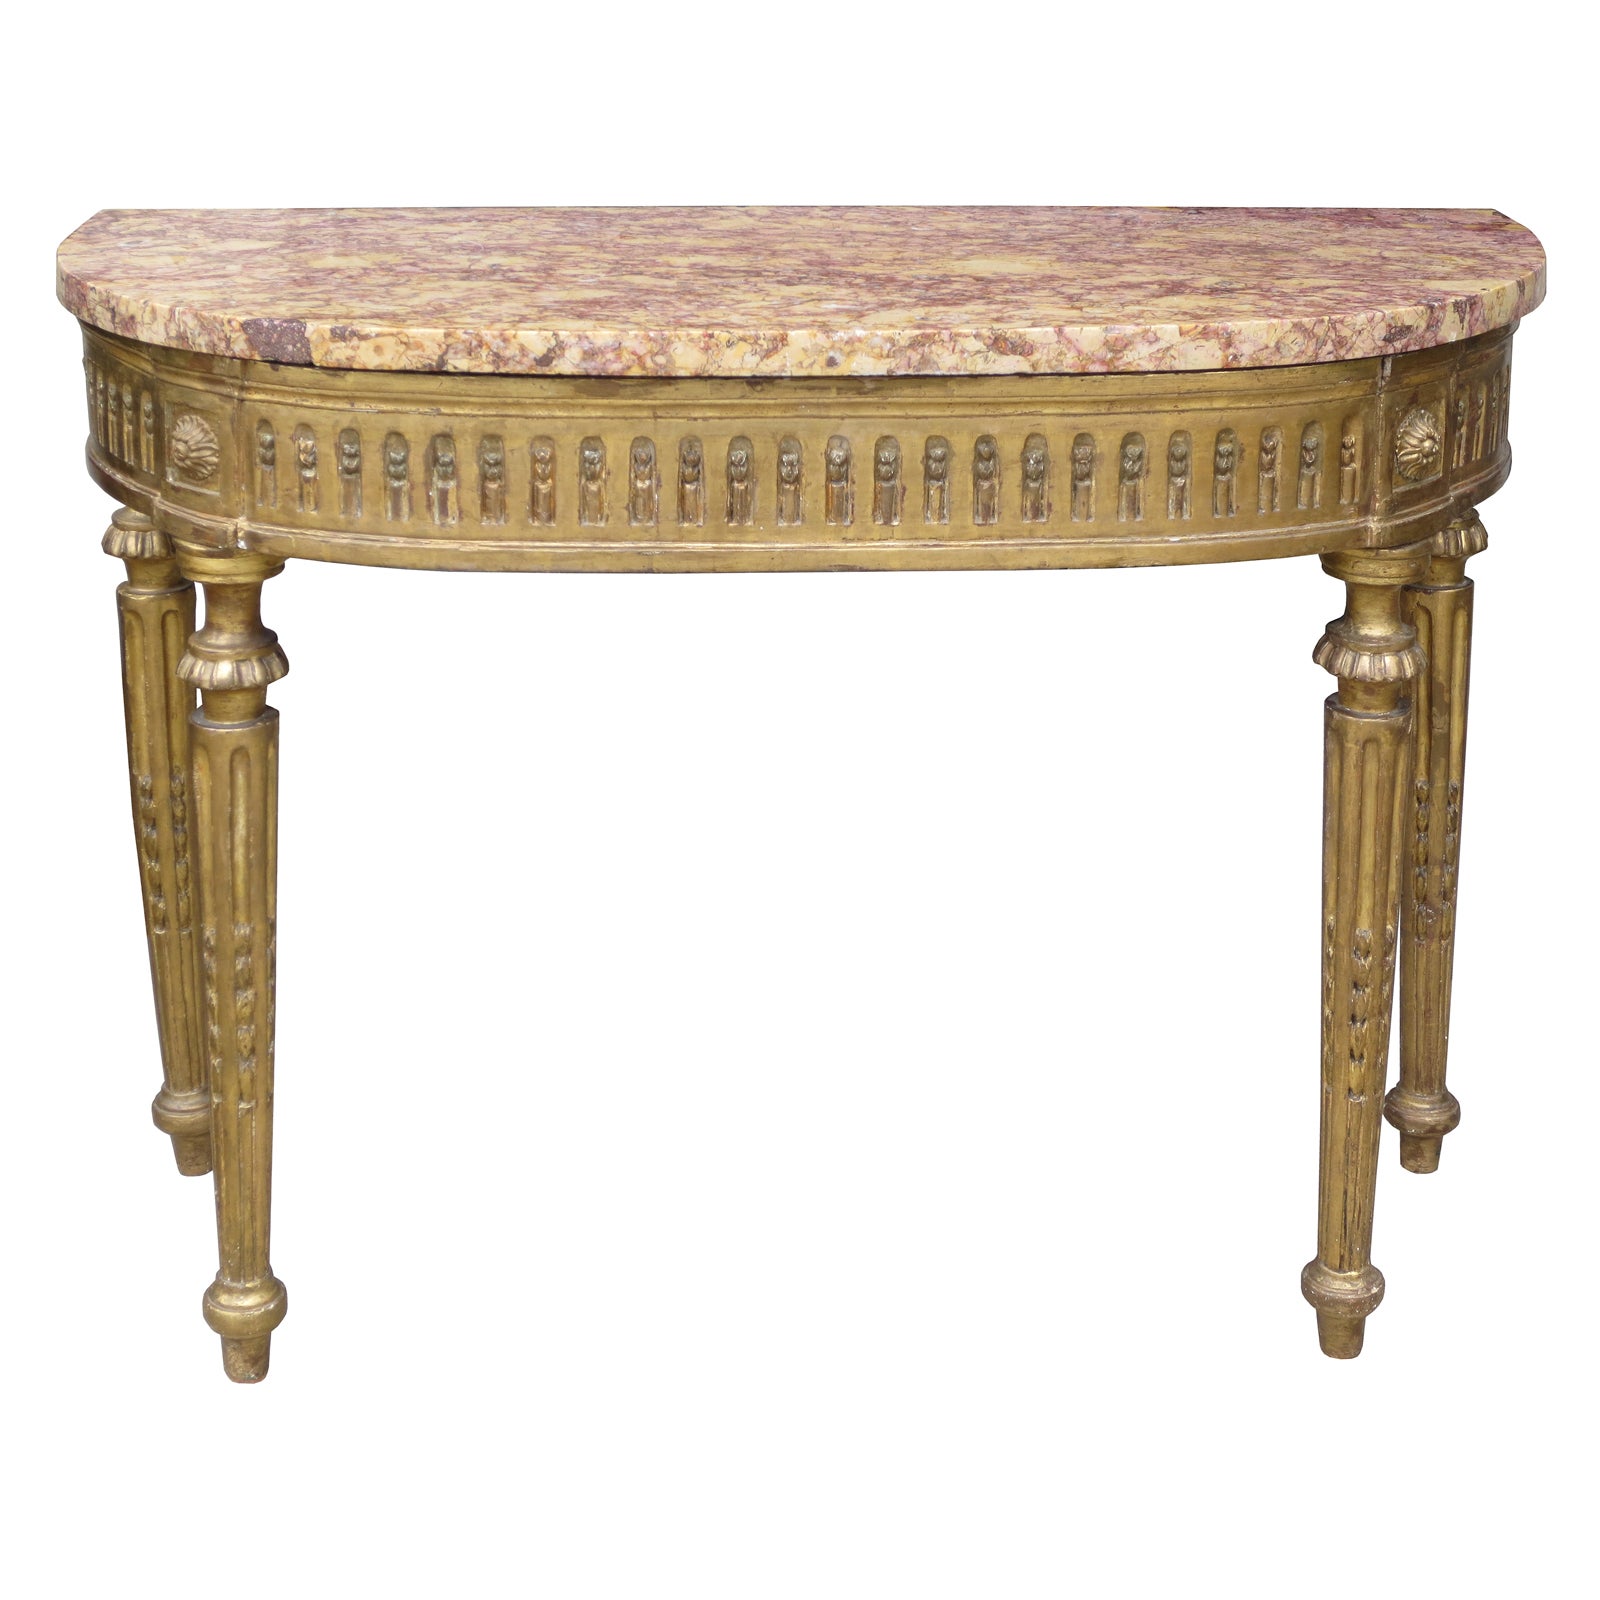 18th/19th Century Continental Carved Giltwood Demilune Console, Breche Marble